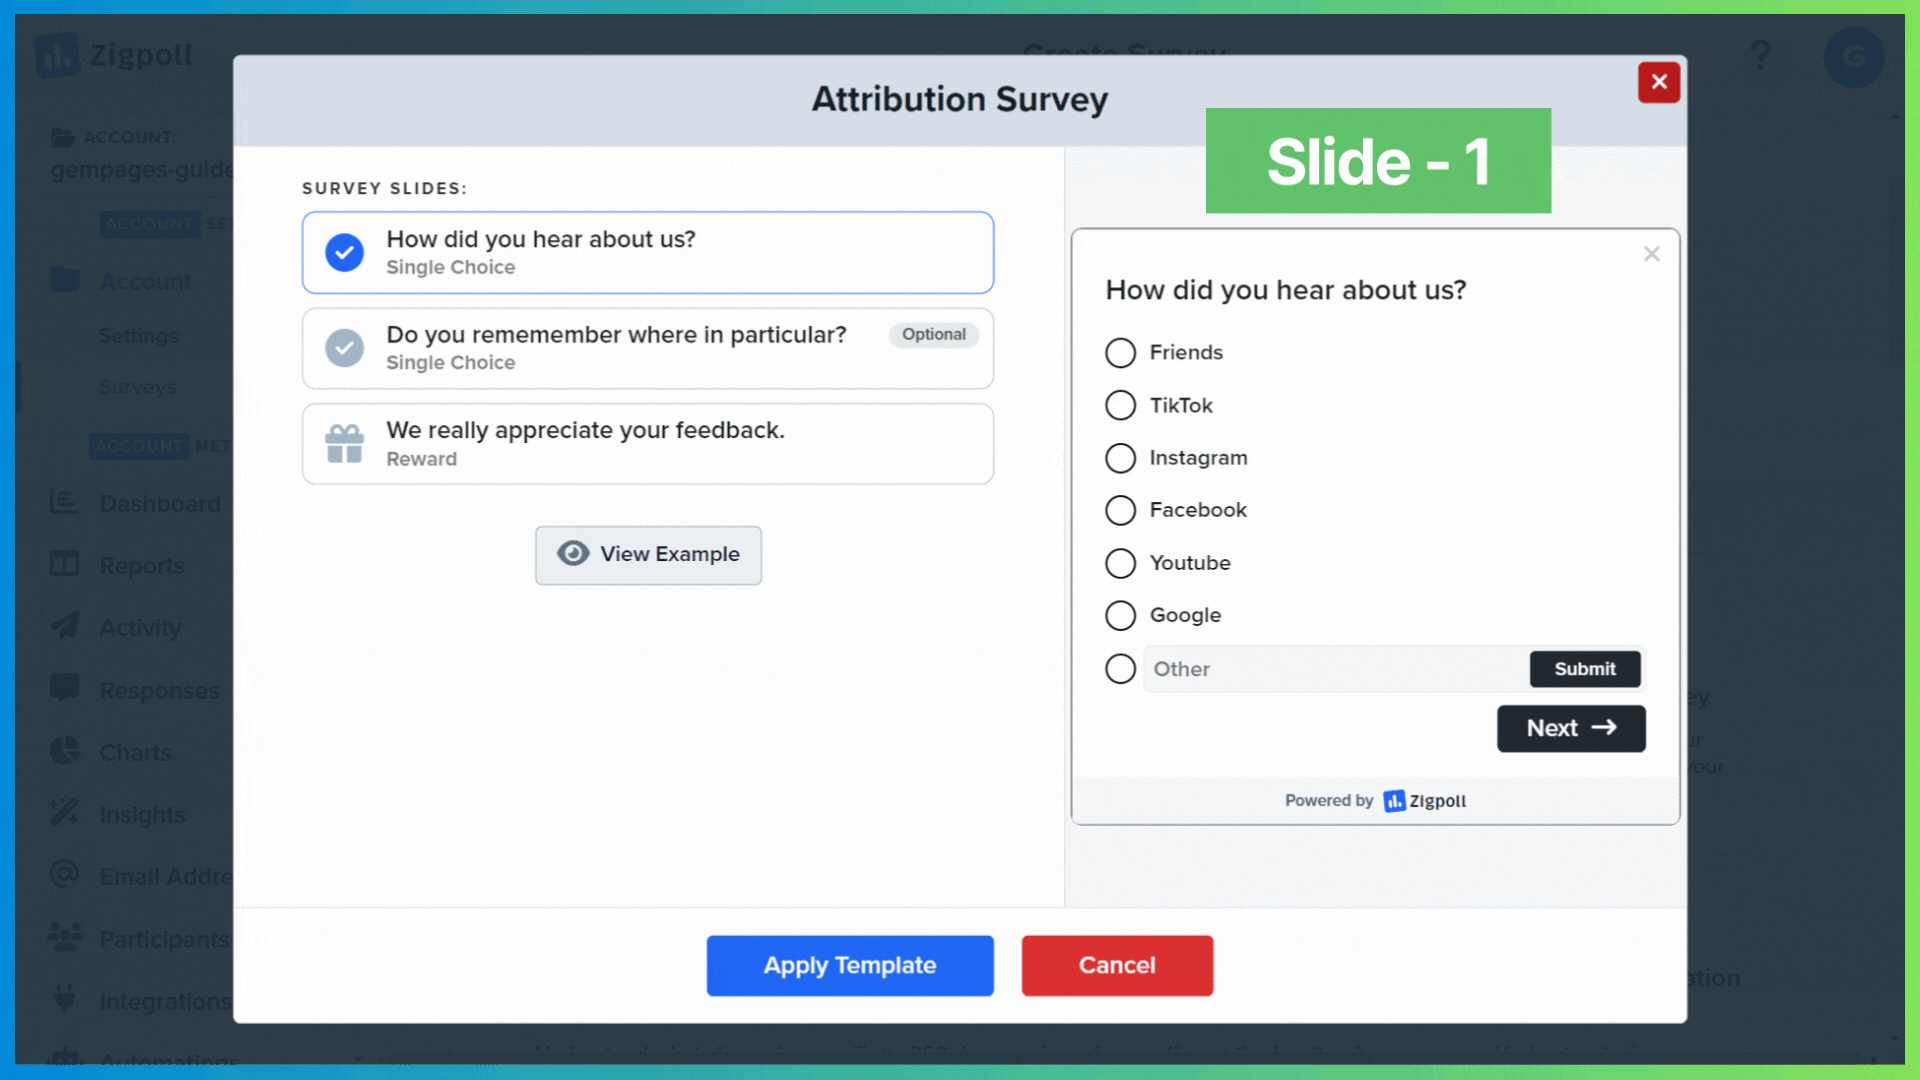 Attribution survey template in the Zigpoll app